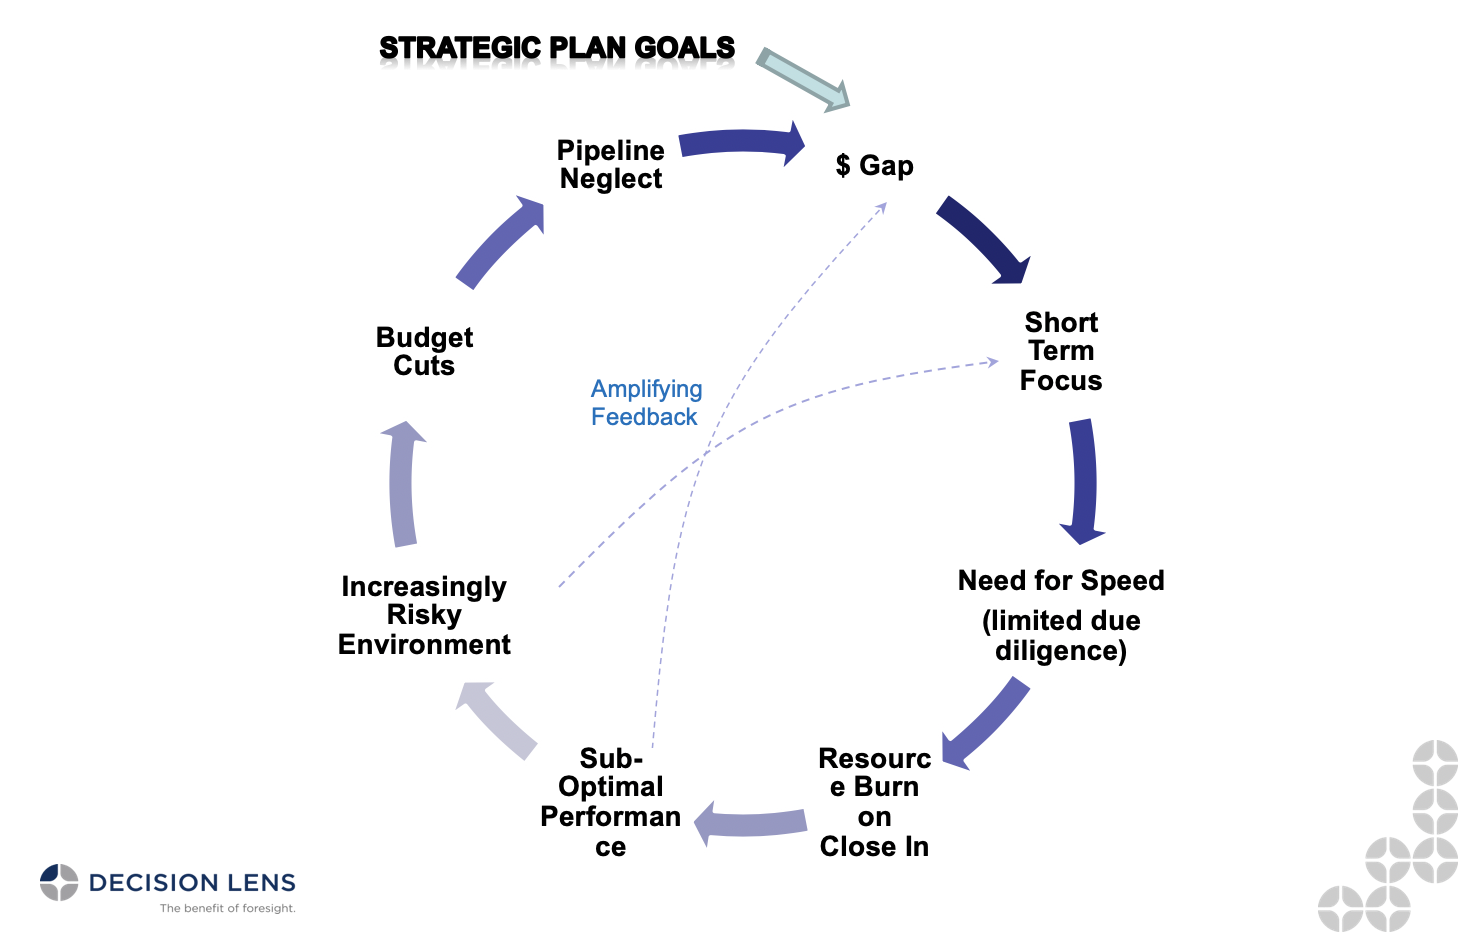  A diagram illustrating the relationship between strategic plan goals and resource allocation. The diagram shows that when there is a gap between the desired state and the current state, organizations often make sub-optimal resource allocation decisions due to time constraints and limited due diligence. This can lead to a vicious cycle of sub-optimal performance, resource burn, and short-term focus. To break this cycle, organizations need to focus on closing the gap between the desired and current states by making better resource allocation decisions.